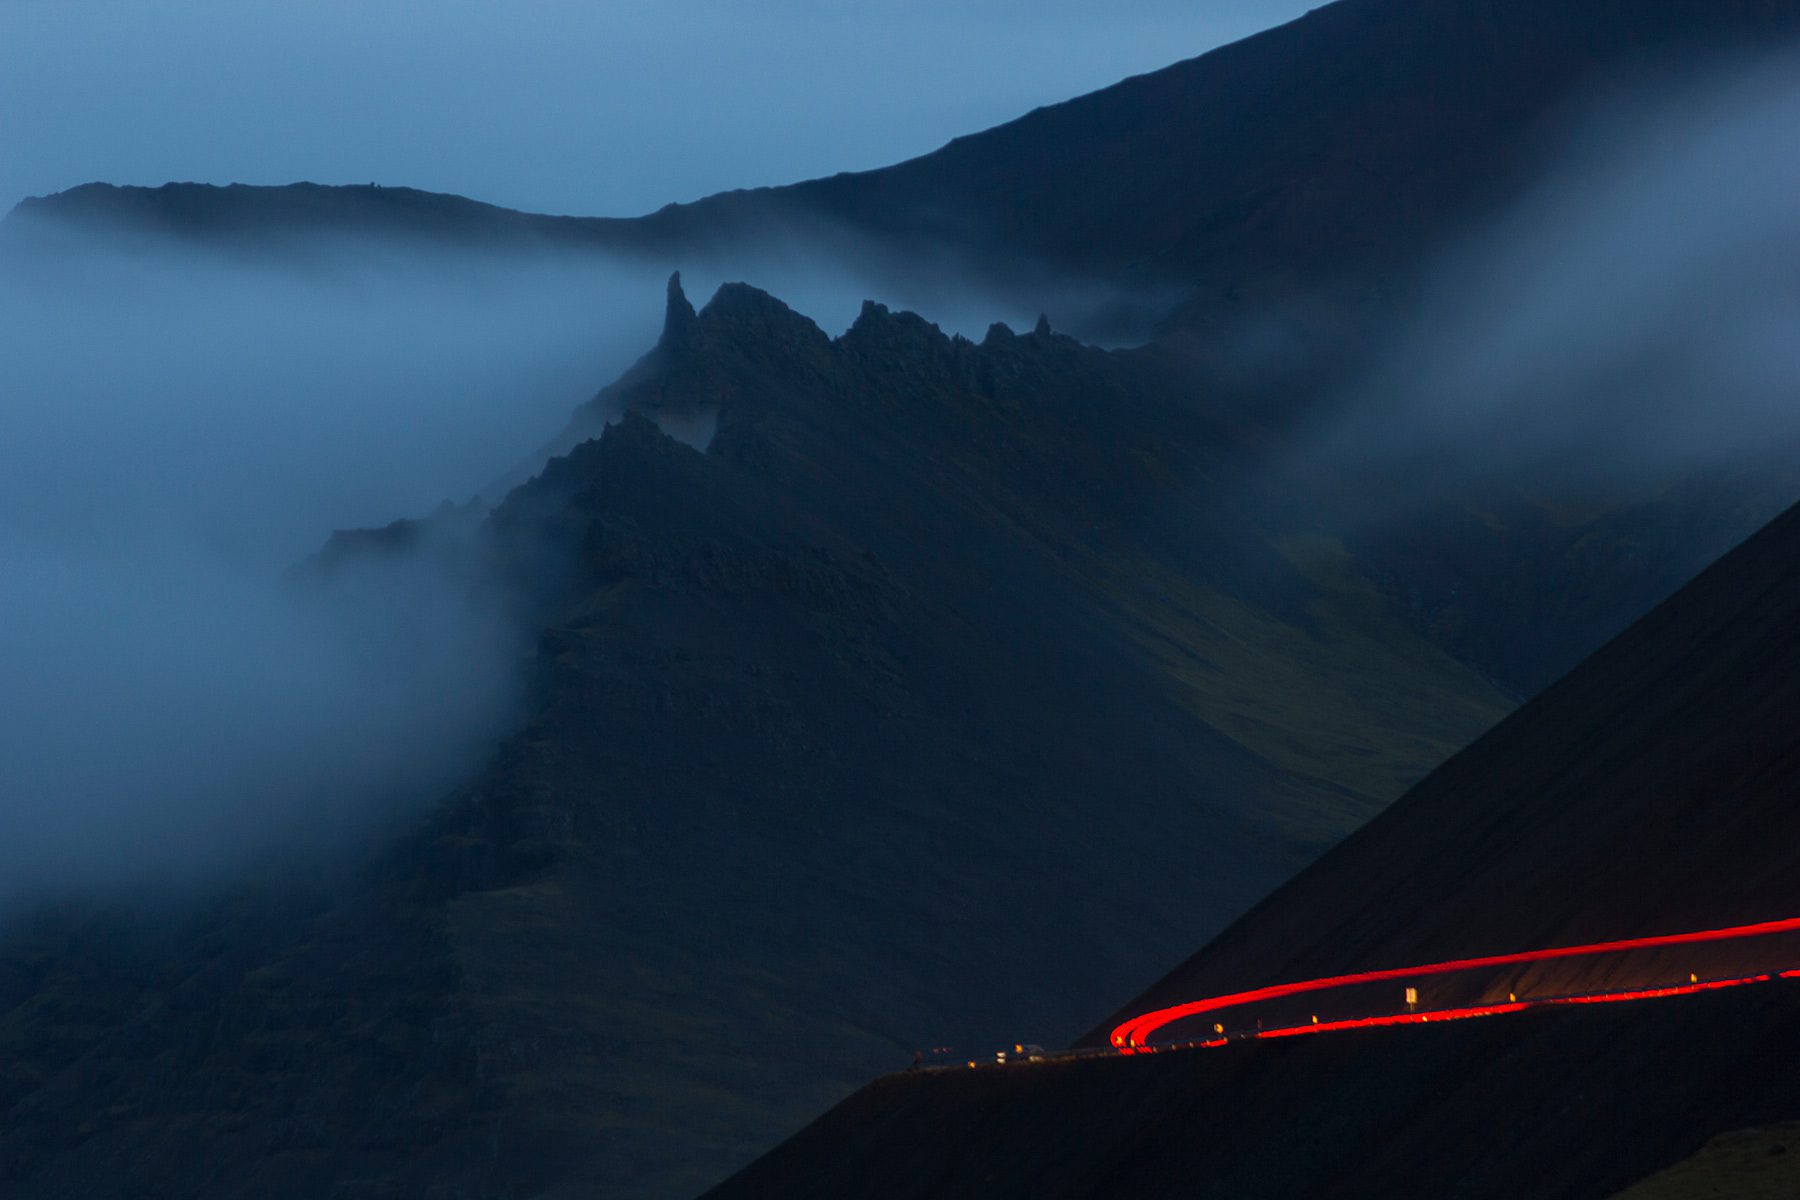 Calendar photo from Iceland - Road lights